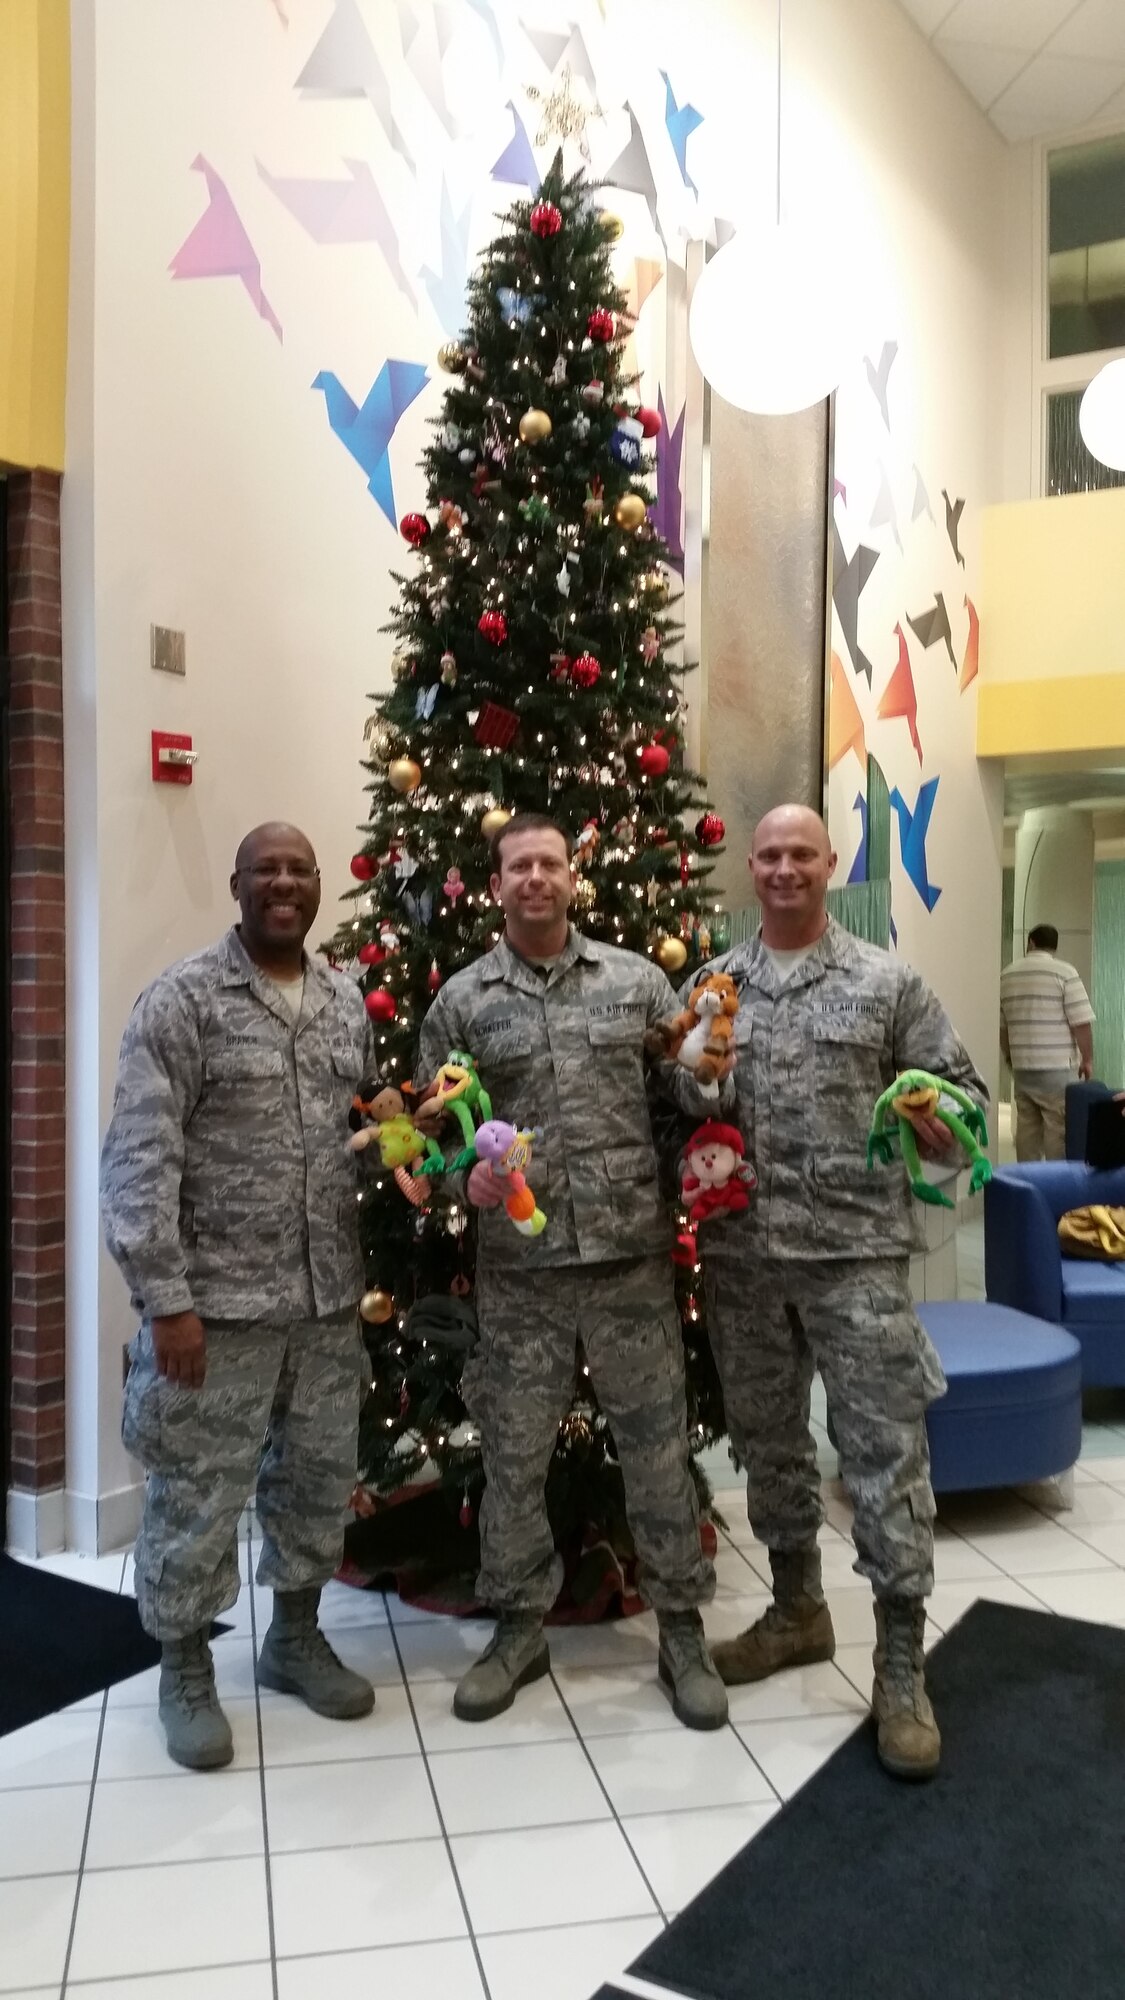 The 178th Wing Chaplain Corps visited children at the Dayton Children’s Hospital Dec. 4 to deliver some holiday cheer to children who are spending the holiday season in the hospital. Chaplain Maj. Joseph Branch, along with chaplain assistants Master Sgt. Michael Golden and Staff Sgt. Robert Schaefer visited 26 children and passed out stuffed animals, dolls, play jewelry and toy cars which were provided by the wing’s Airman Family Readiness. (Courtesy photo)